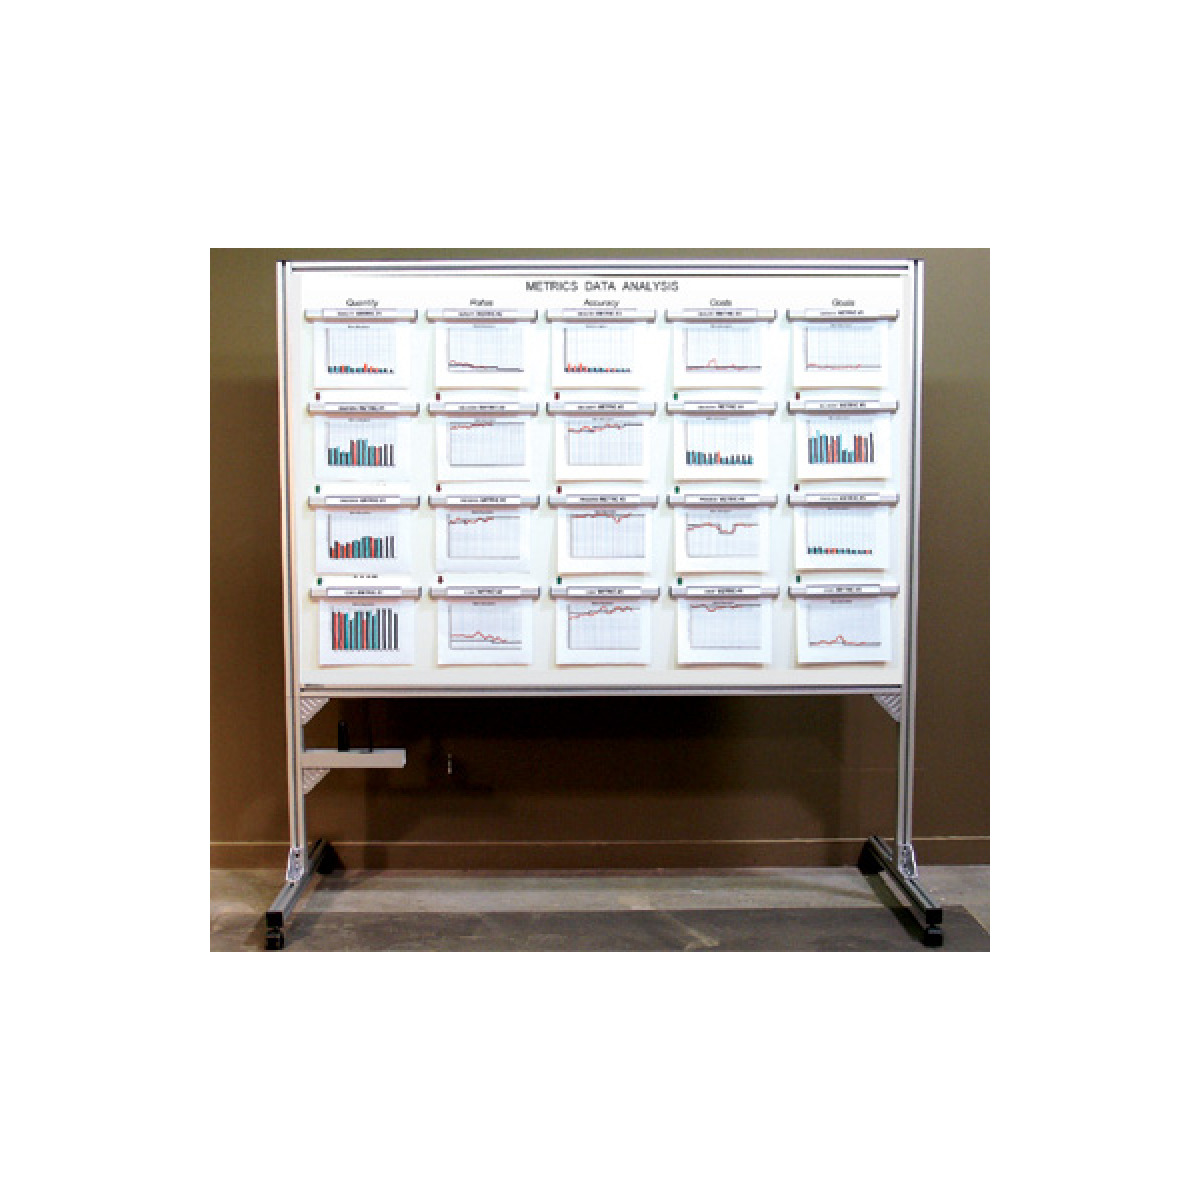 Warehouse display board to manage and display key performance measurements